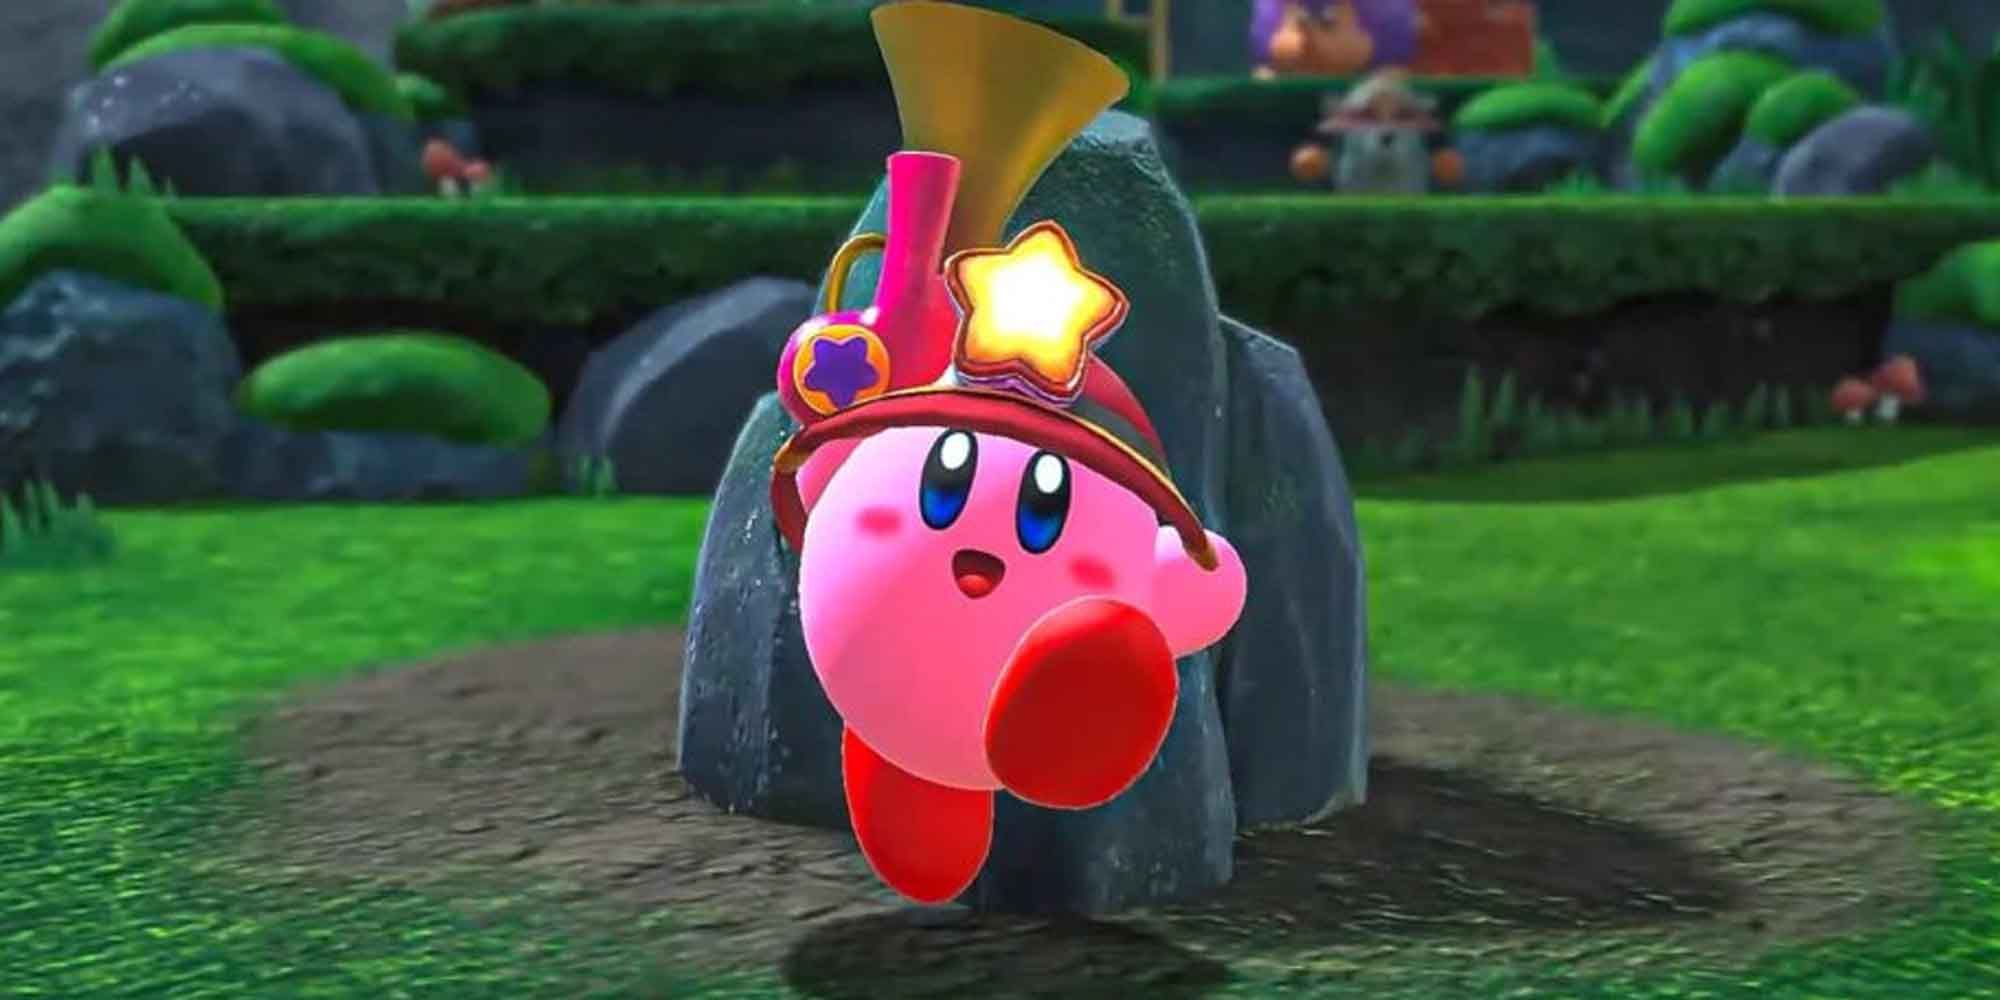 Kirby with a gun and a helmet jumping happily in front of a rock